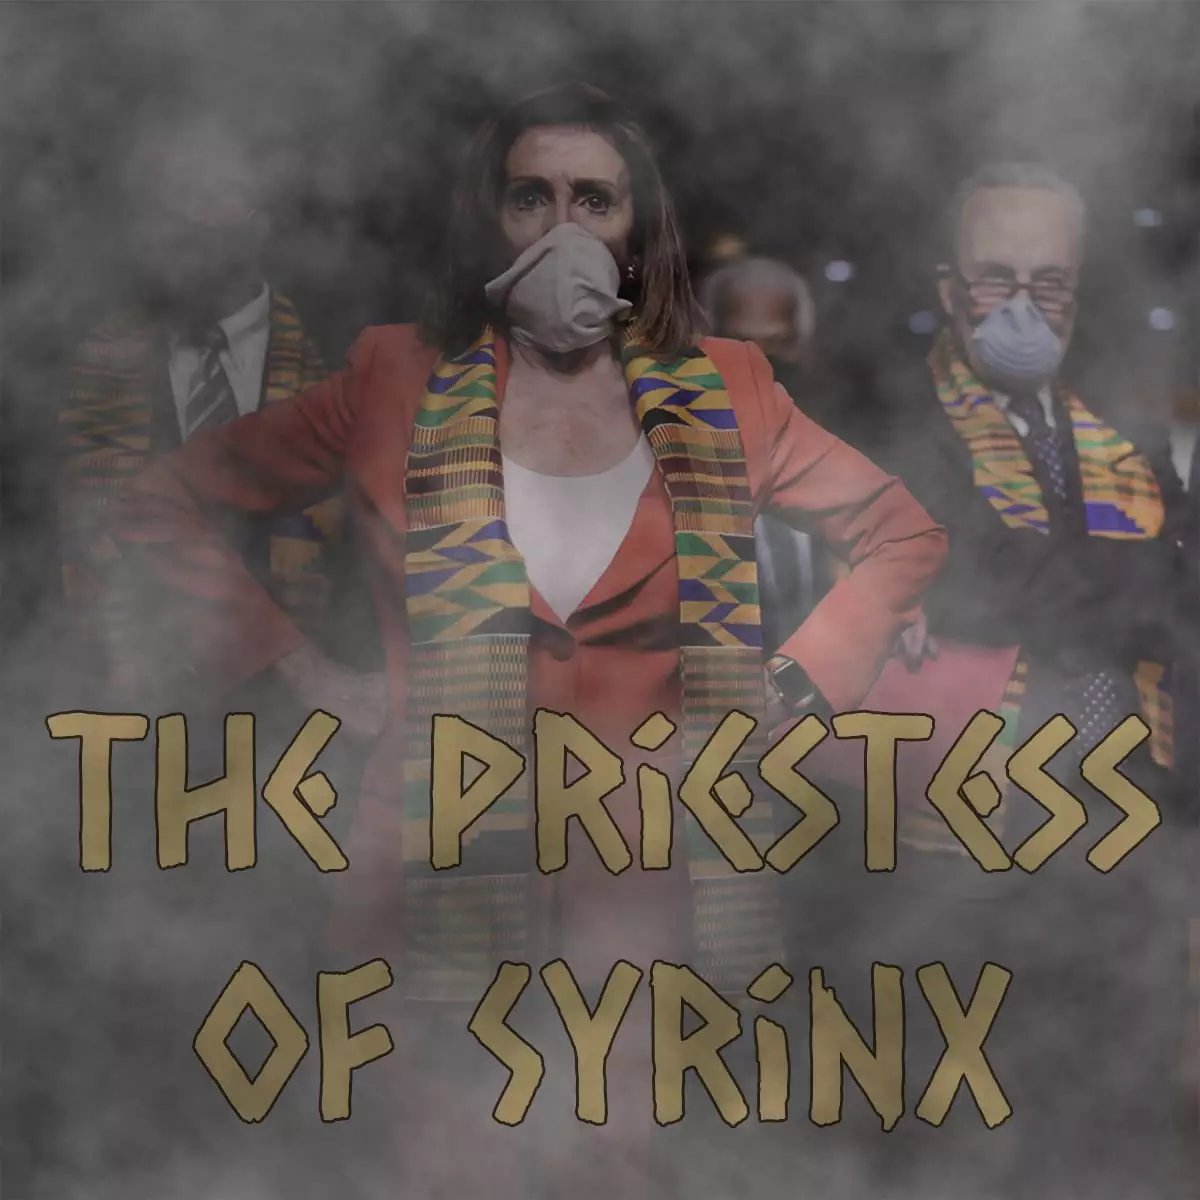 The Priestess of the Temples of SYRINX